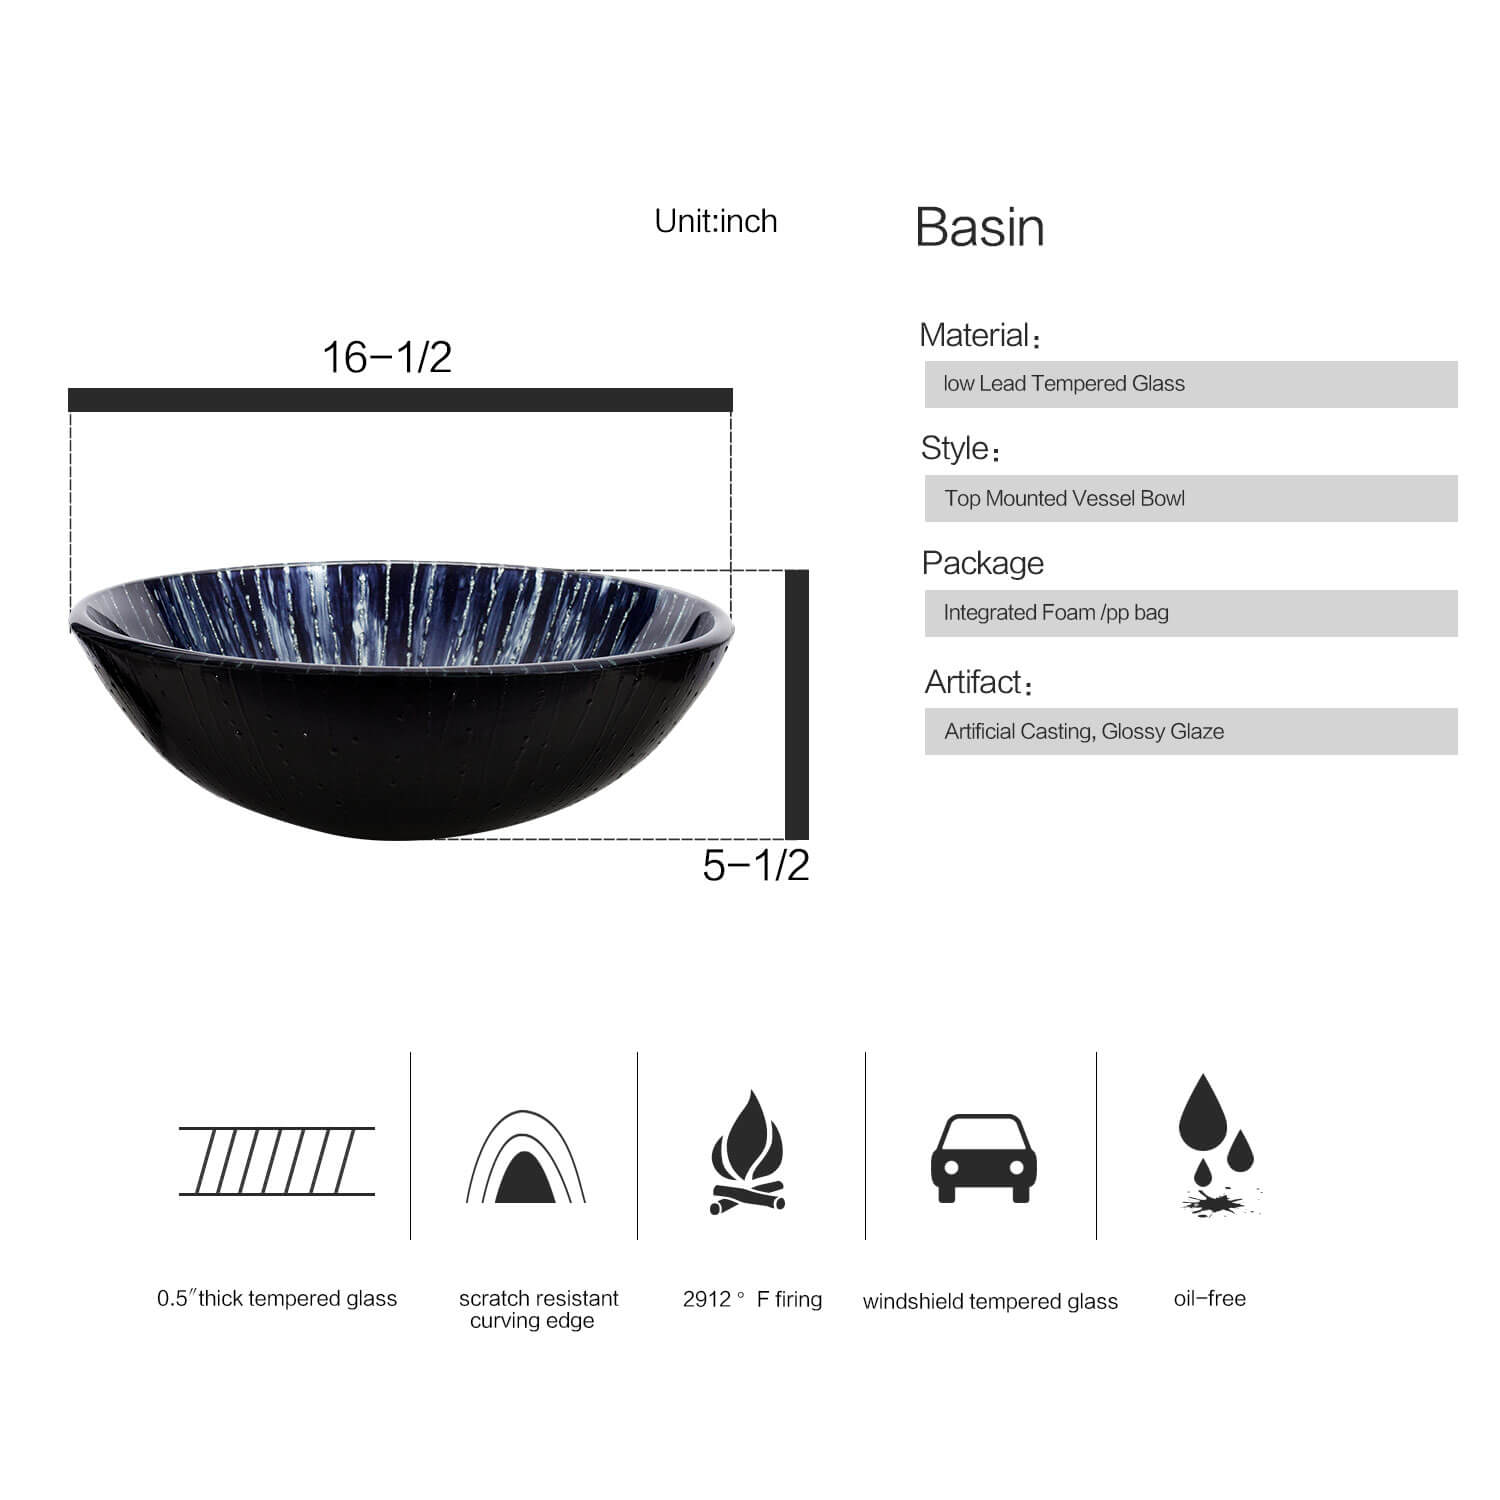 Elecwish patterened round sink BG1003 basin size and features